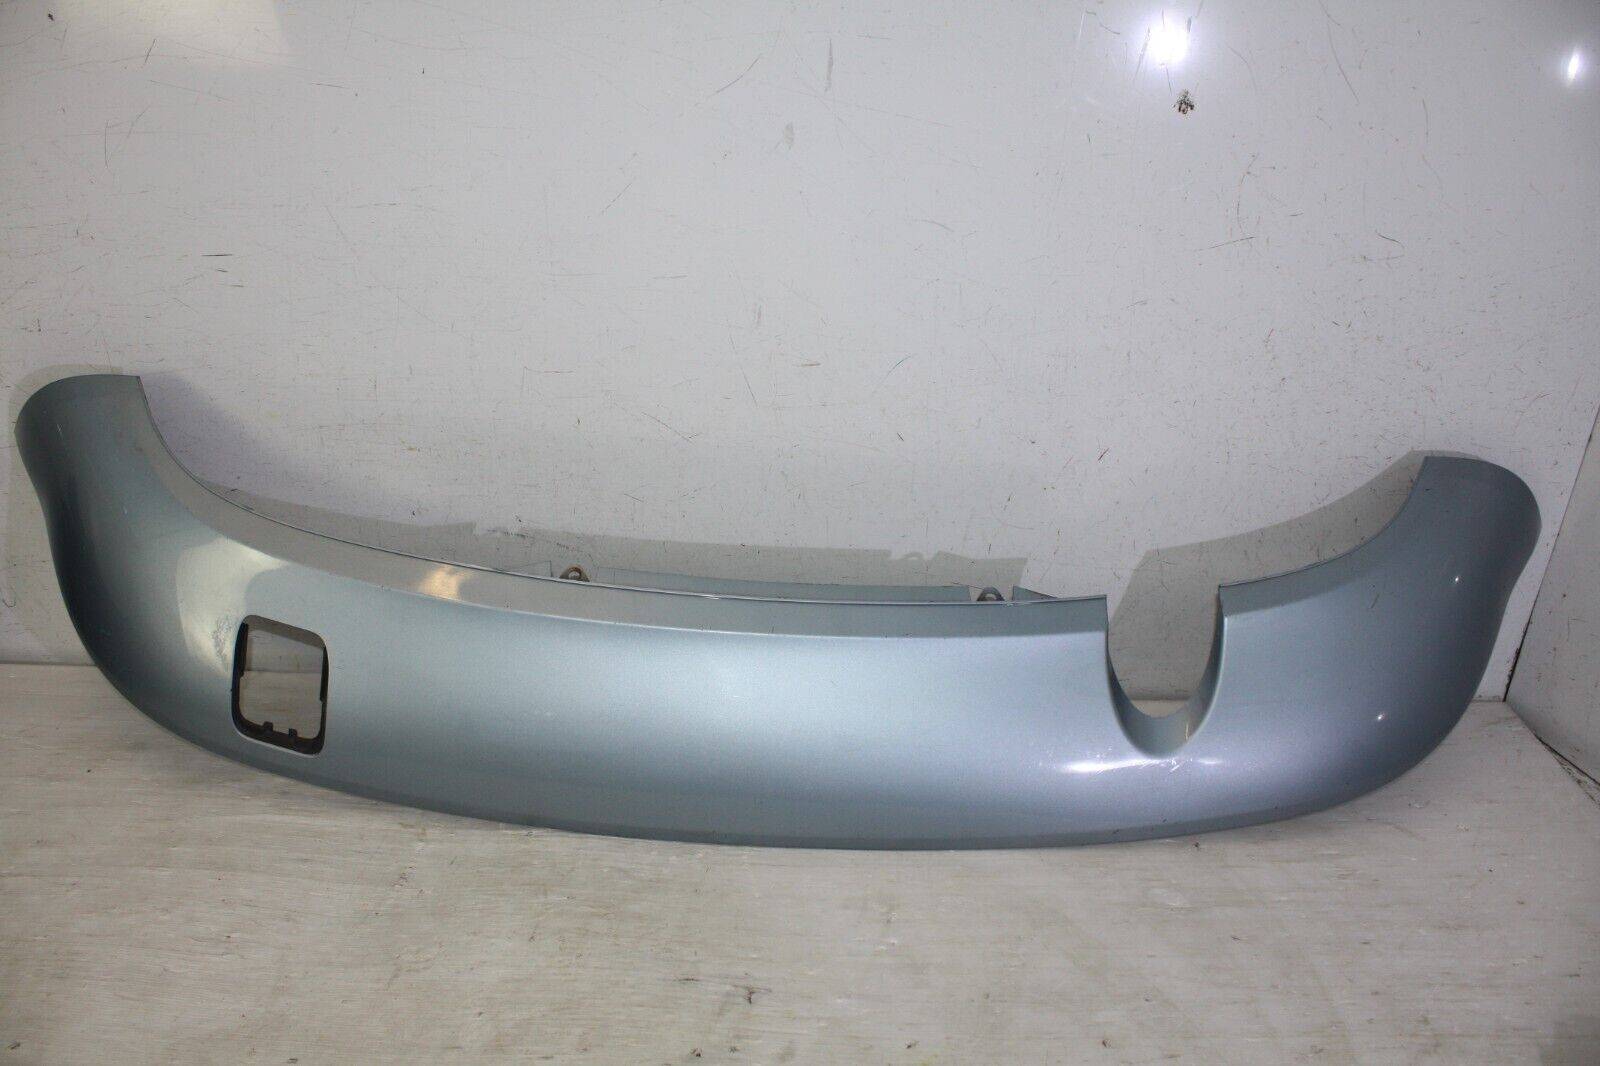 Audi A3 Rear Bumper Lower Section 2004 To 2008 8P4807521 Genuine 176083979344